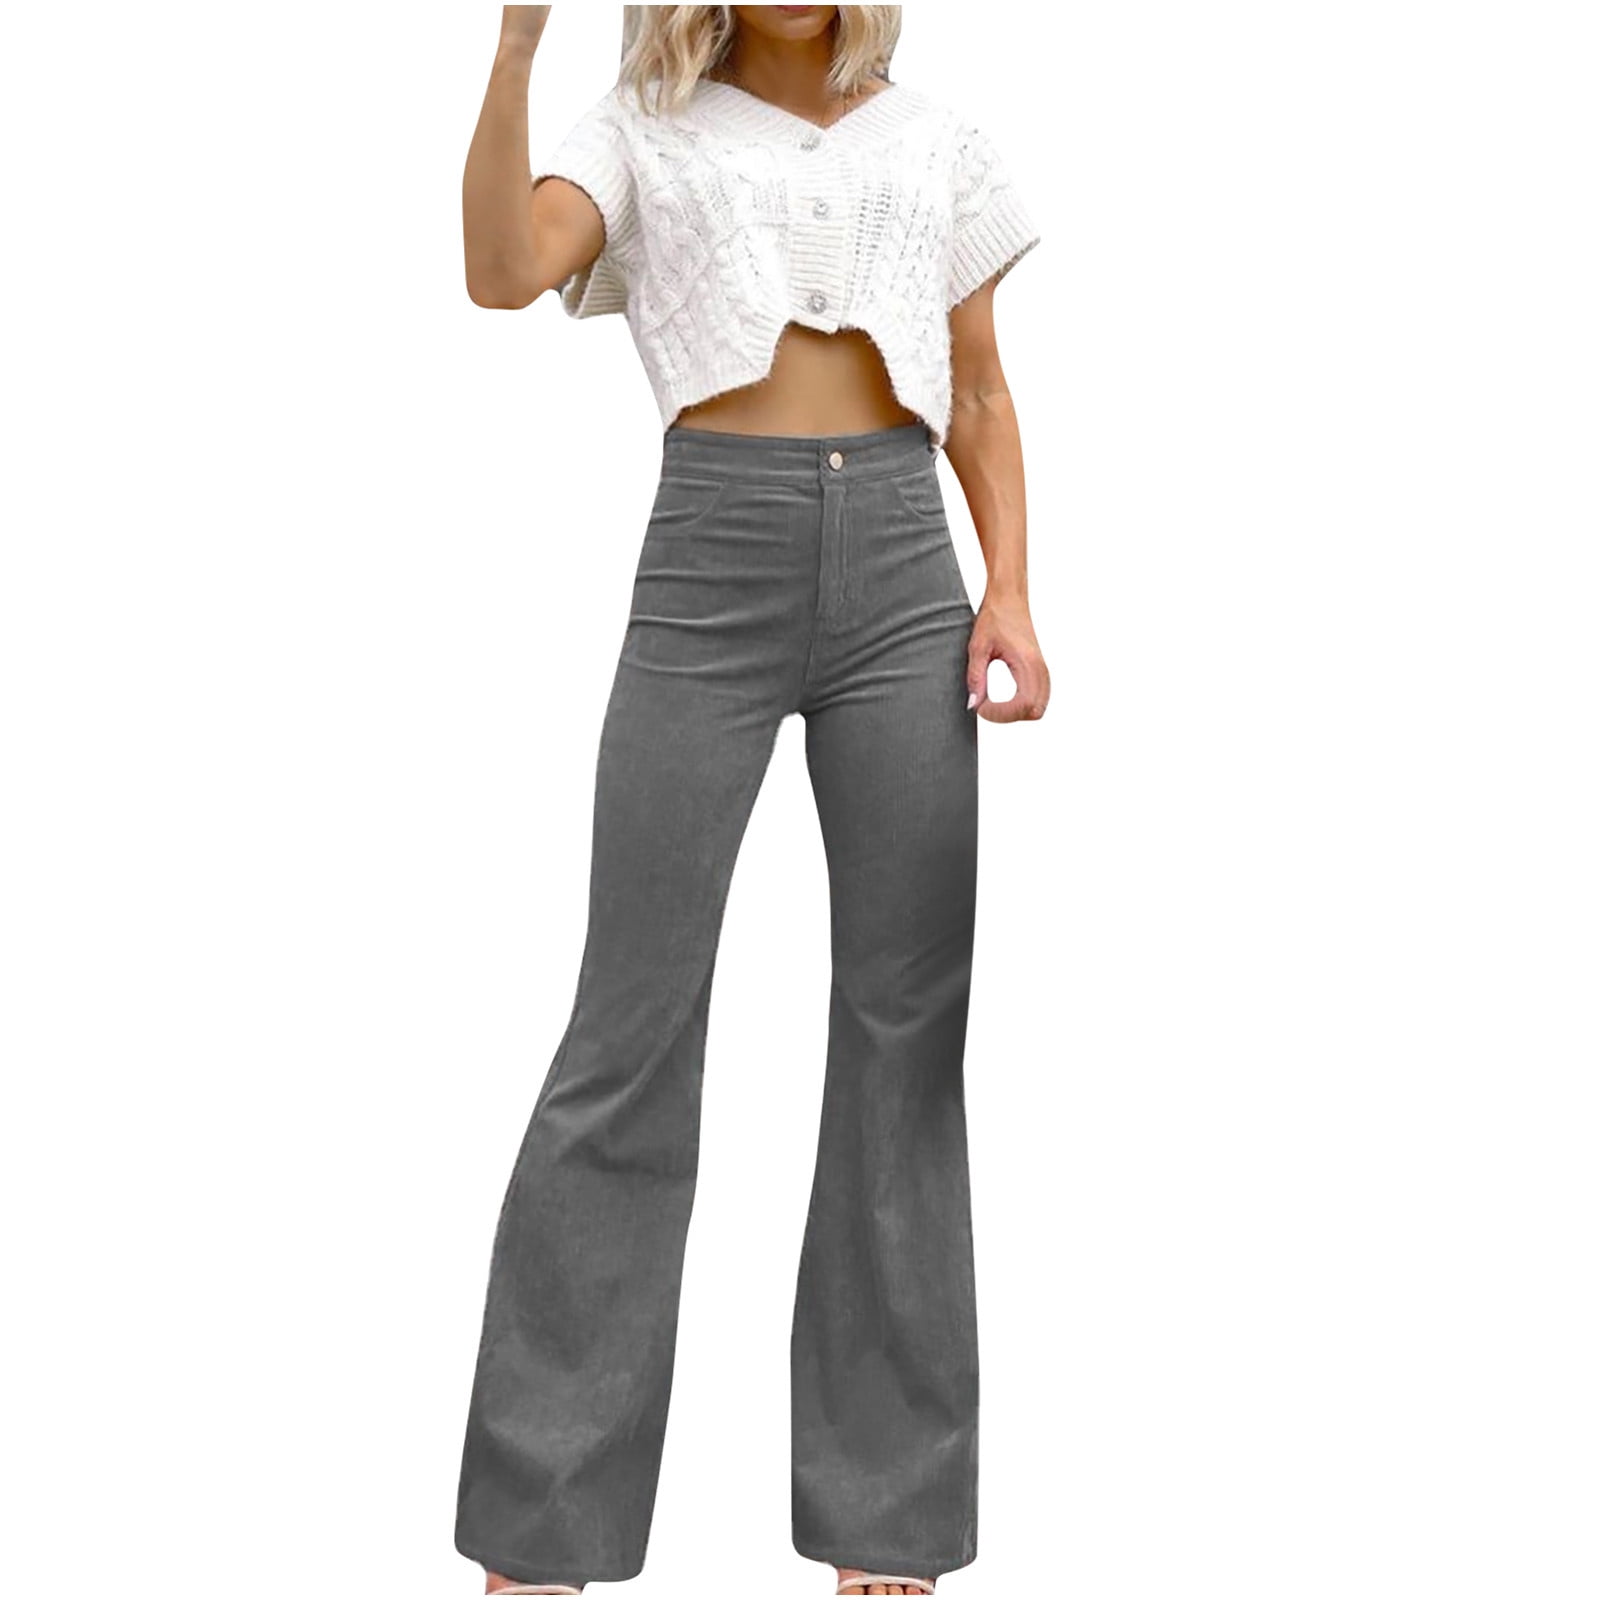 Bigersell Women Wide Leg Pants Full Length Women's Fashion Slim Fit  Comfortable Solid Color Pocket Casual Flared Pants 80s Leeggings for Ladies  